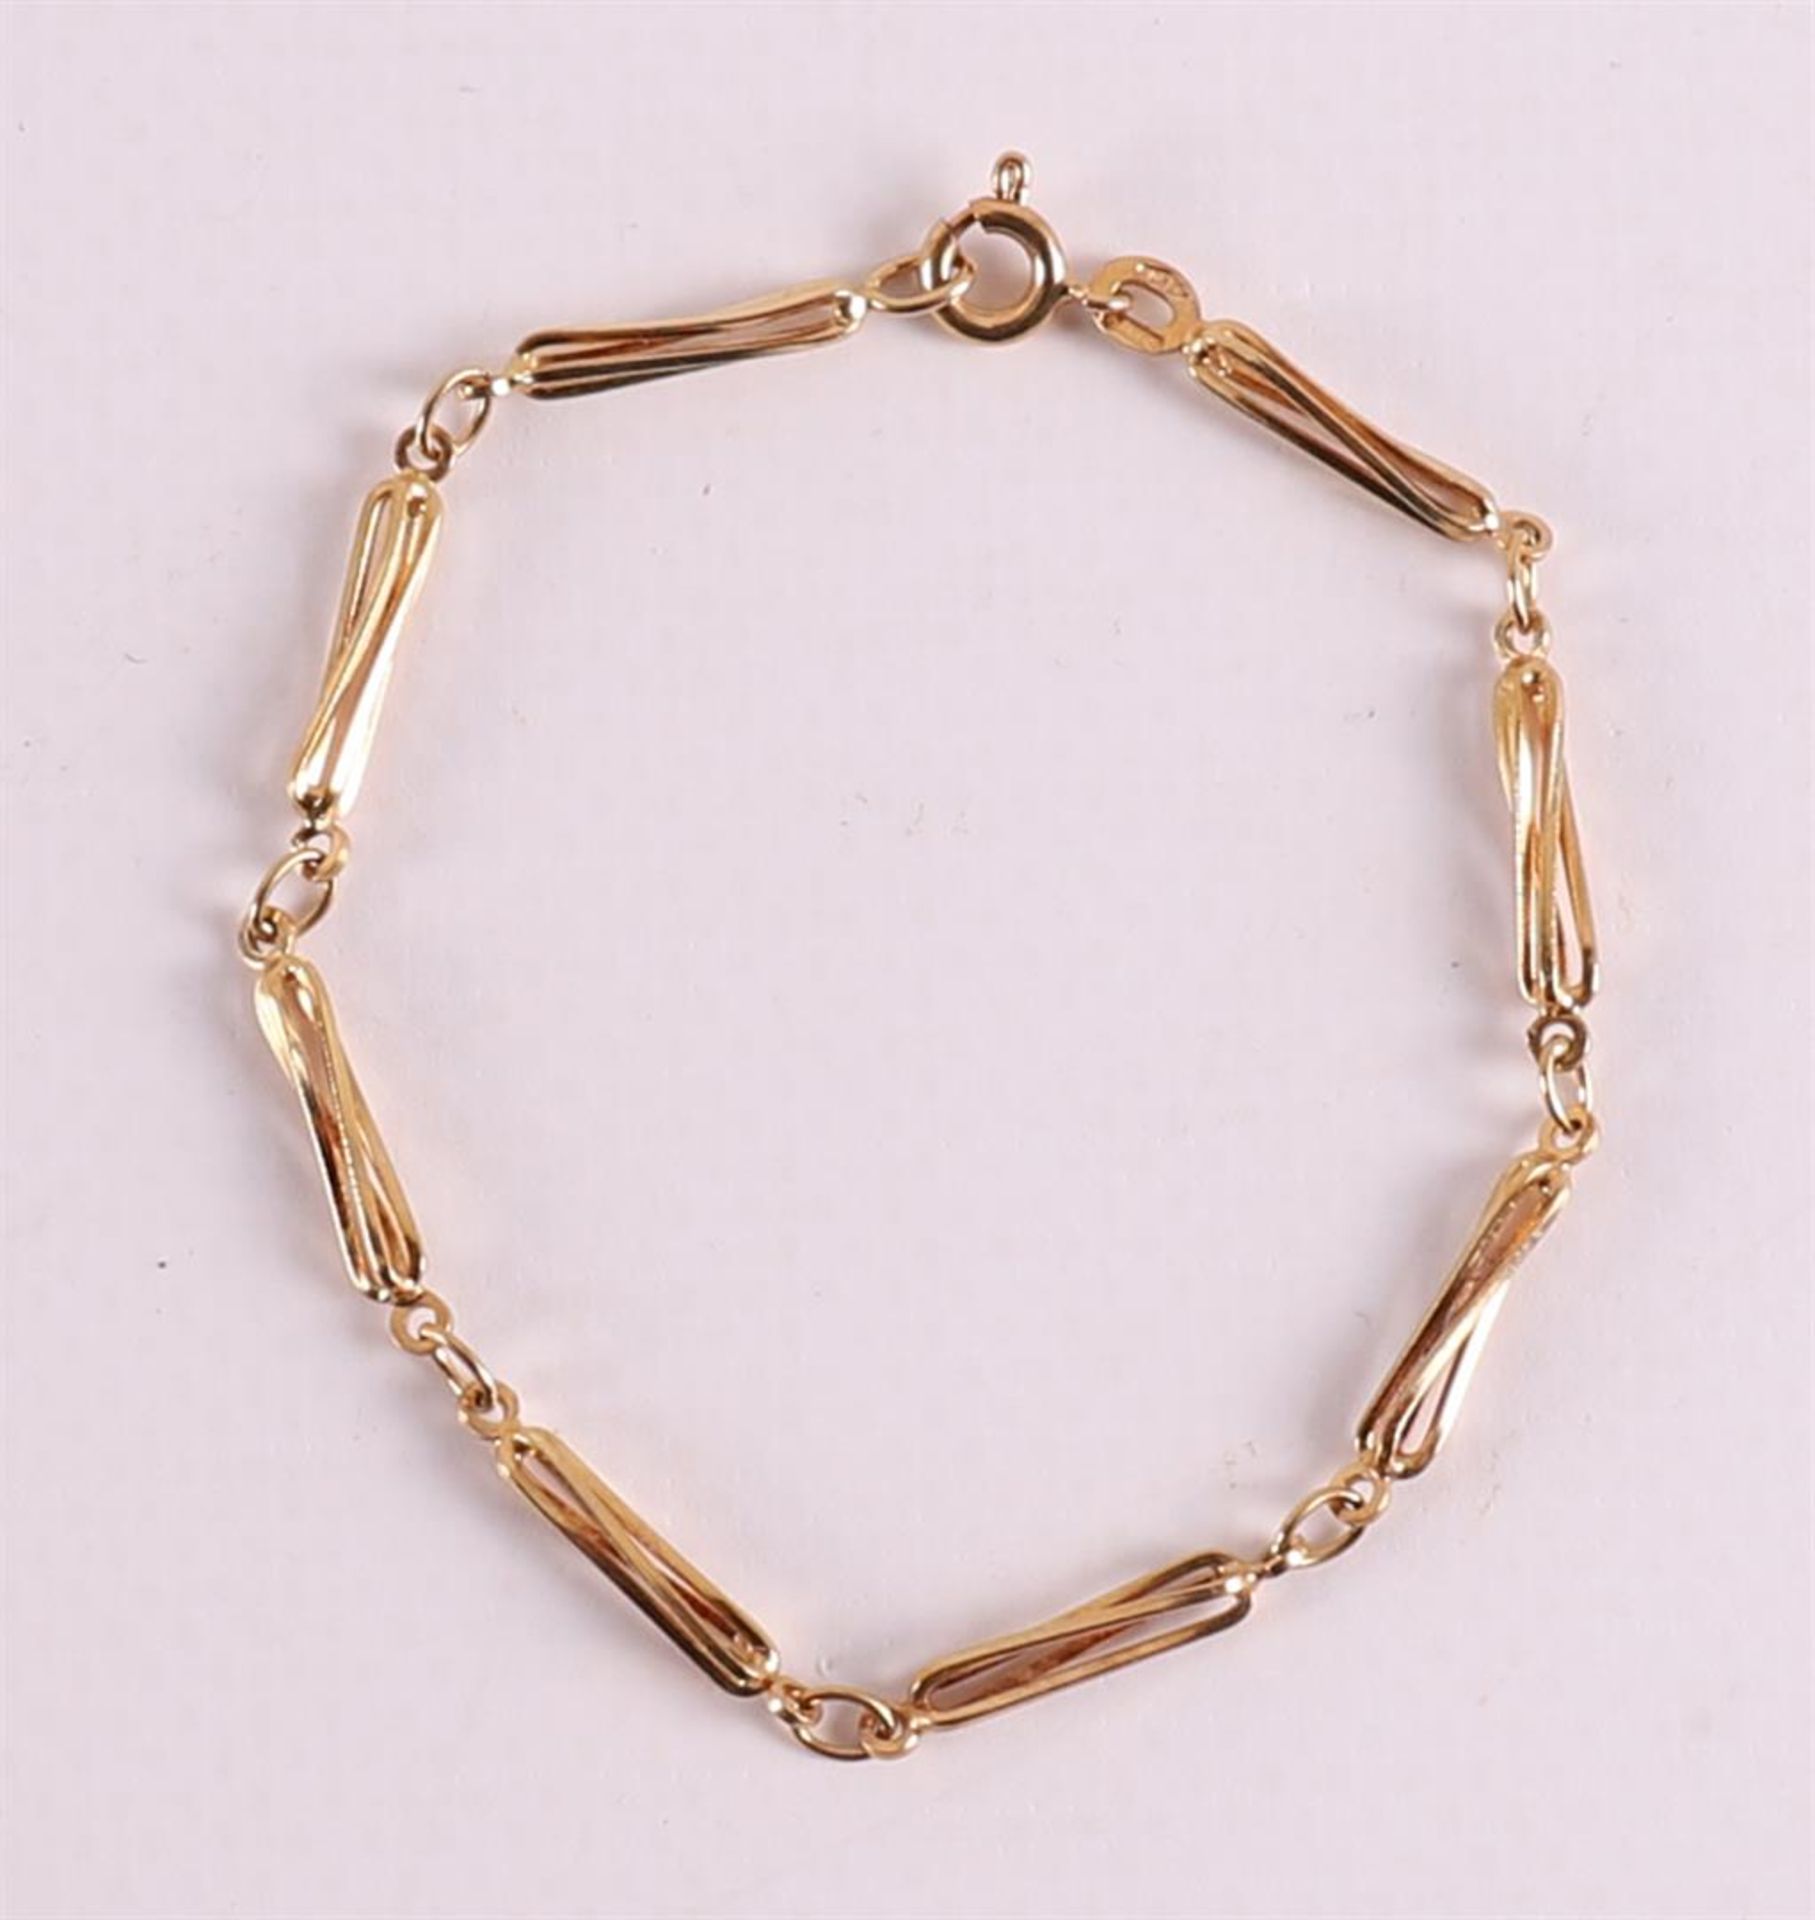 An 18 kt 750/1000 gold bracelet with twisted link.